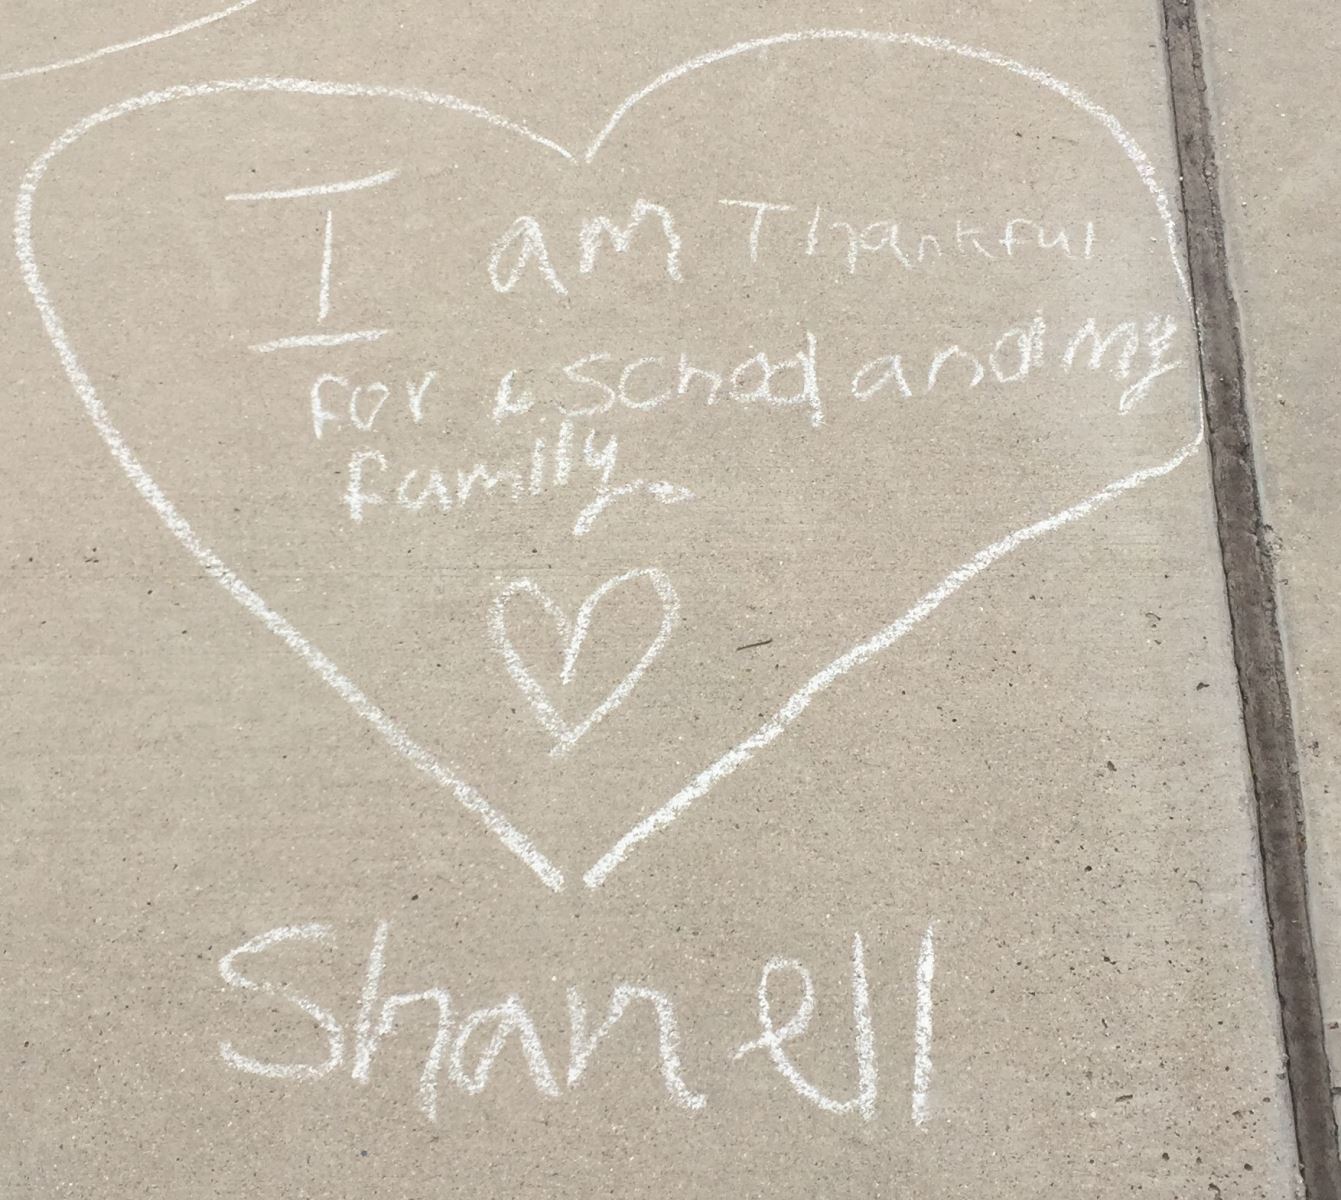 Chalk Heart Drawing With Text I Am Thankful For My School And My Family